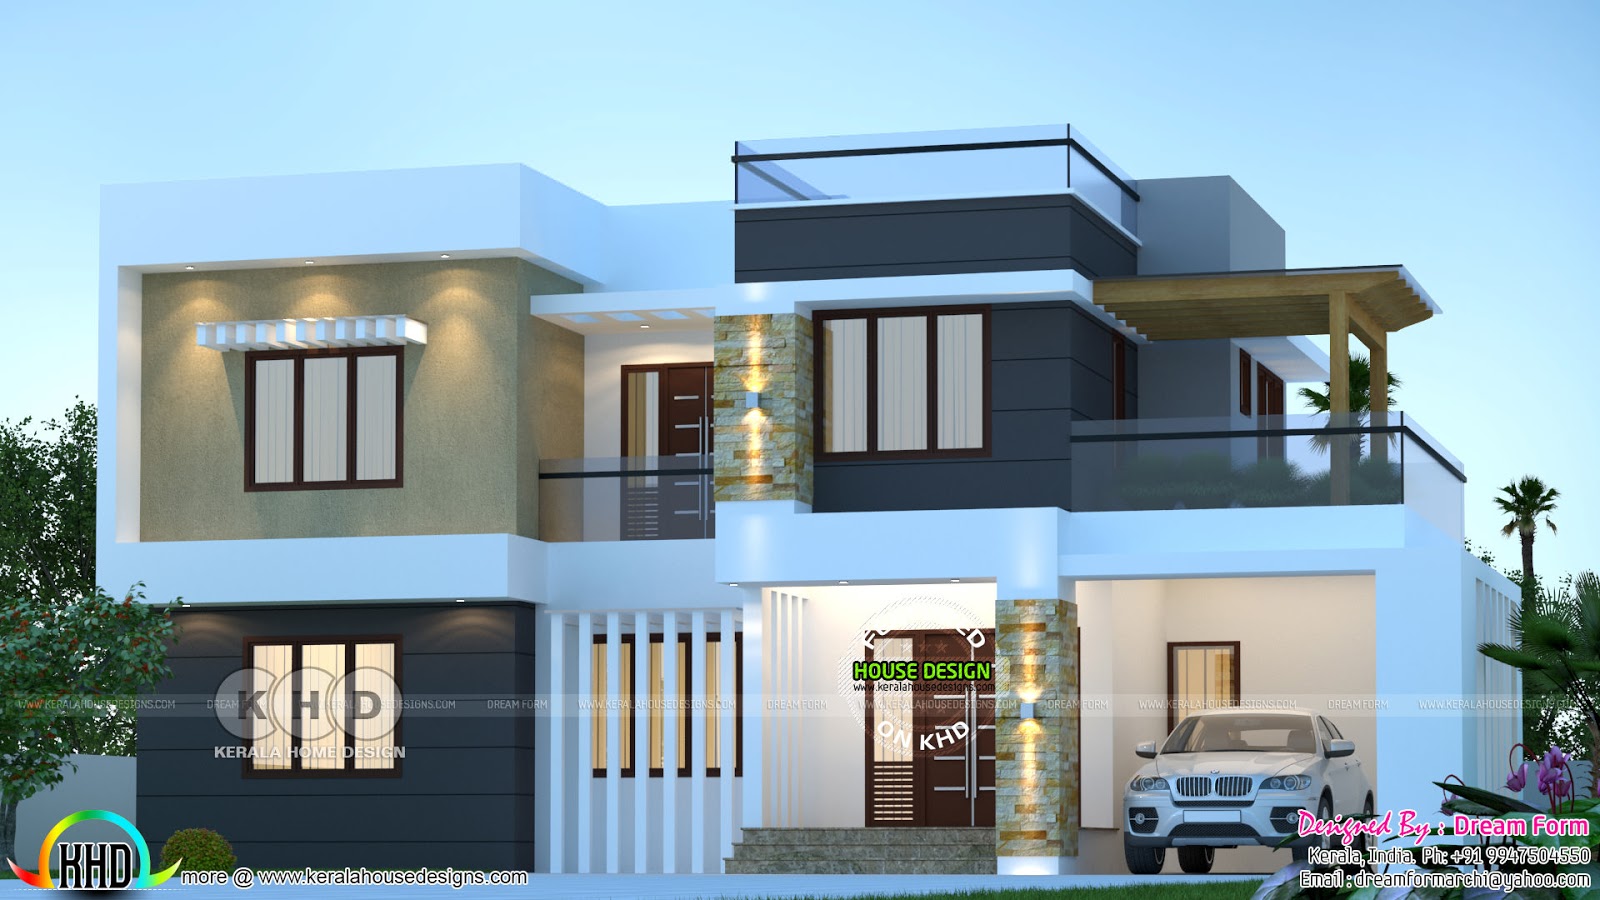 4 Bedroom Contemporary House New Model House In Kerala 2019